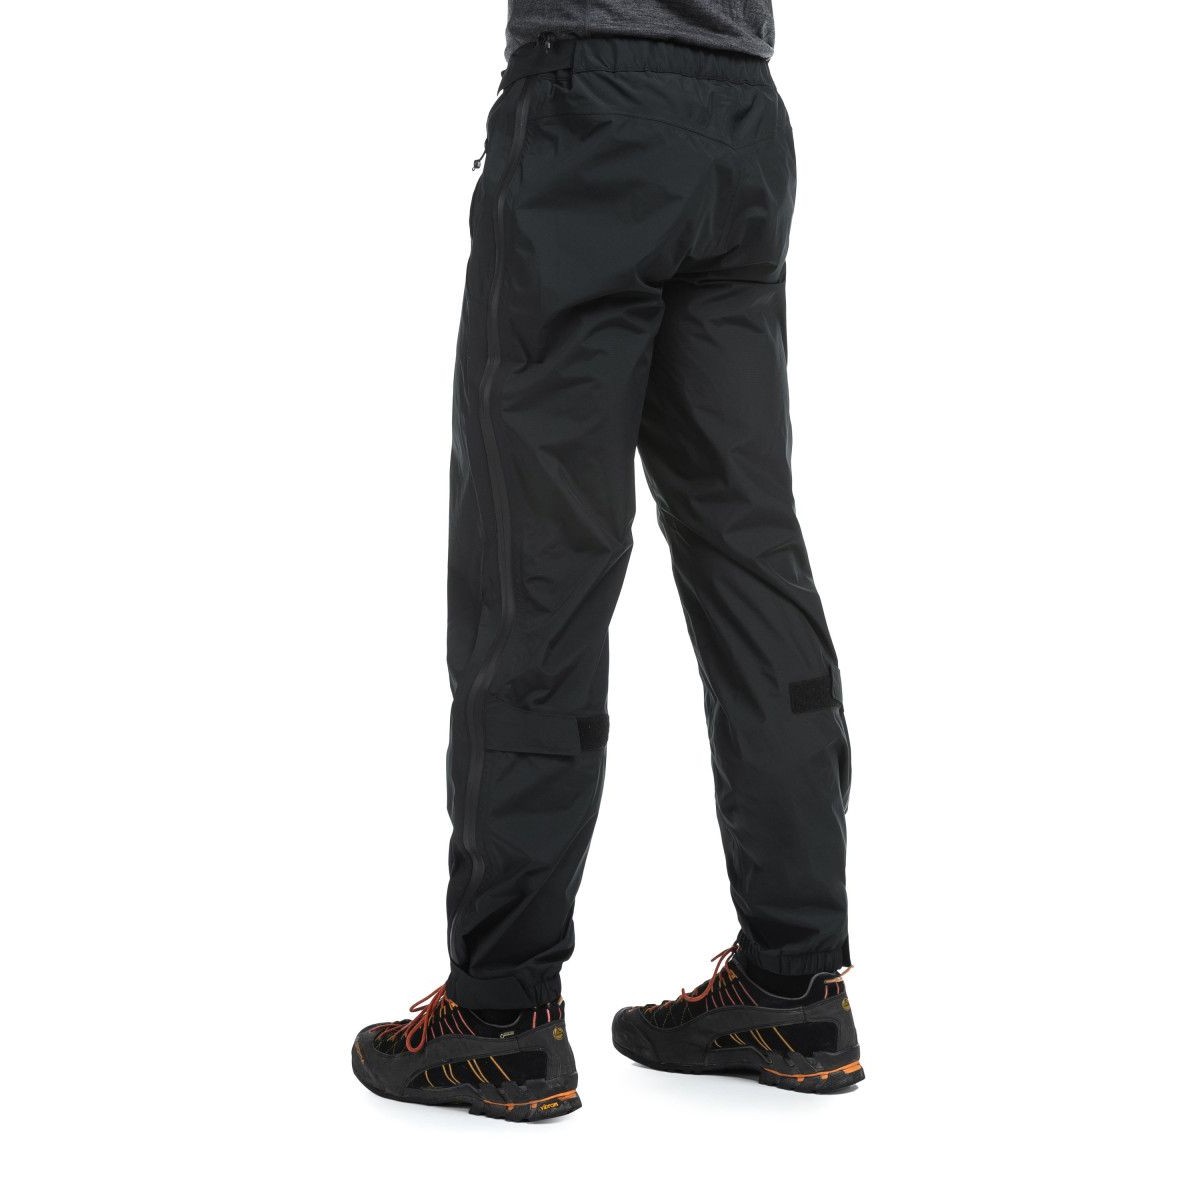 Men technology two layers outdoor waterproof pants N Alpin-M KILPI - view 4